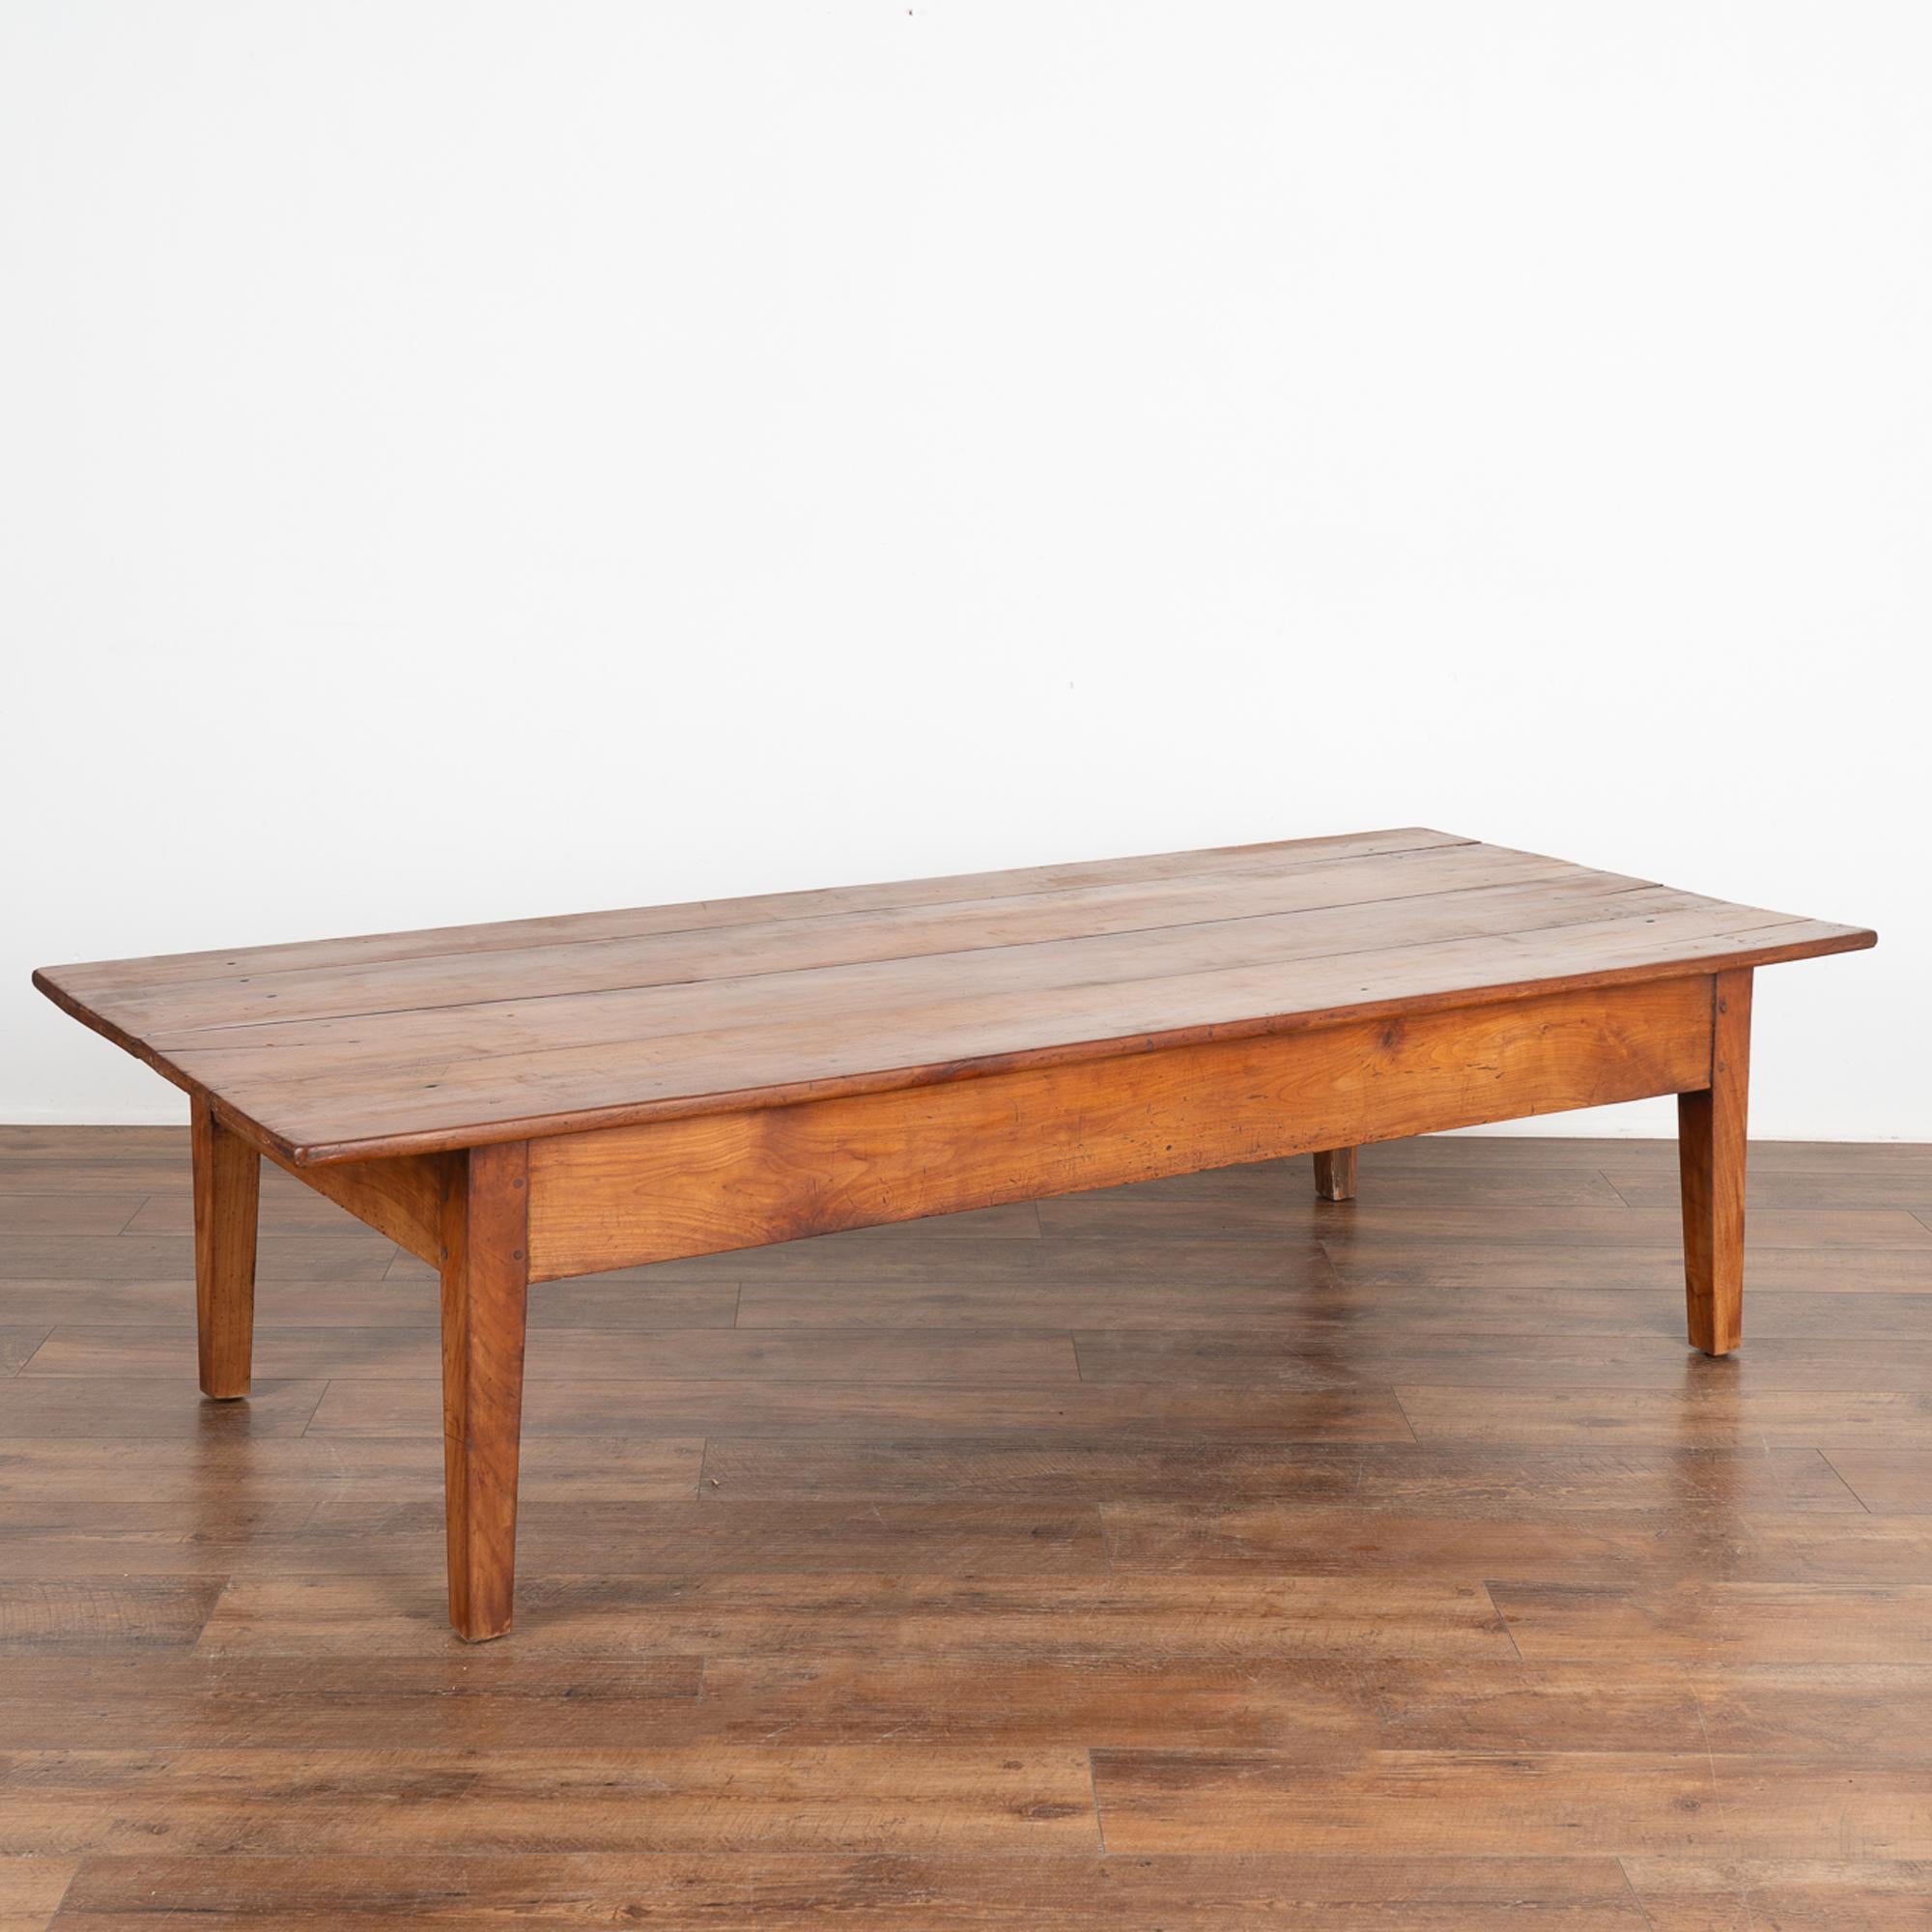 Large French Country Cherry Wood Coffee Table, circa 1820-40 6